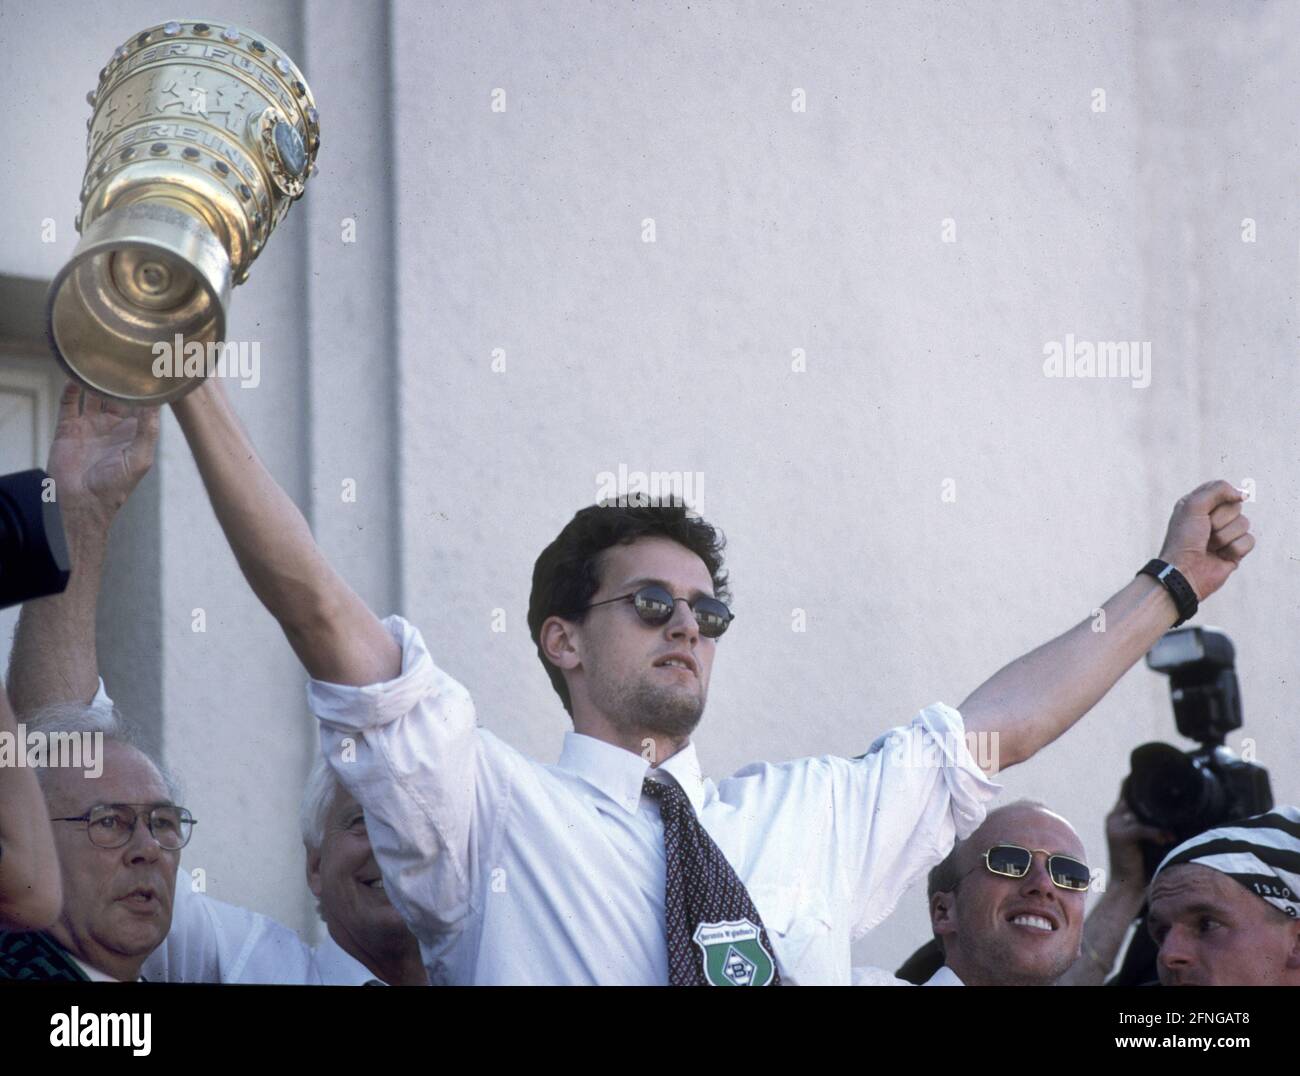 Borussia Mönchengladbach DFB cup winner 1995. Heiko Herrlich with cup at the reception in Gladbach 25.06.1995. [automated translation] Stock Photo